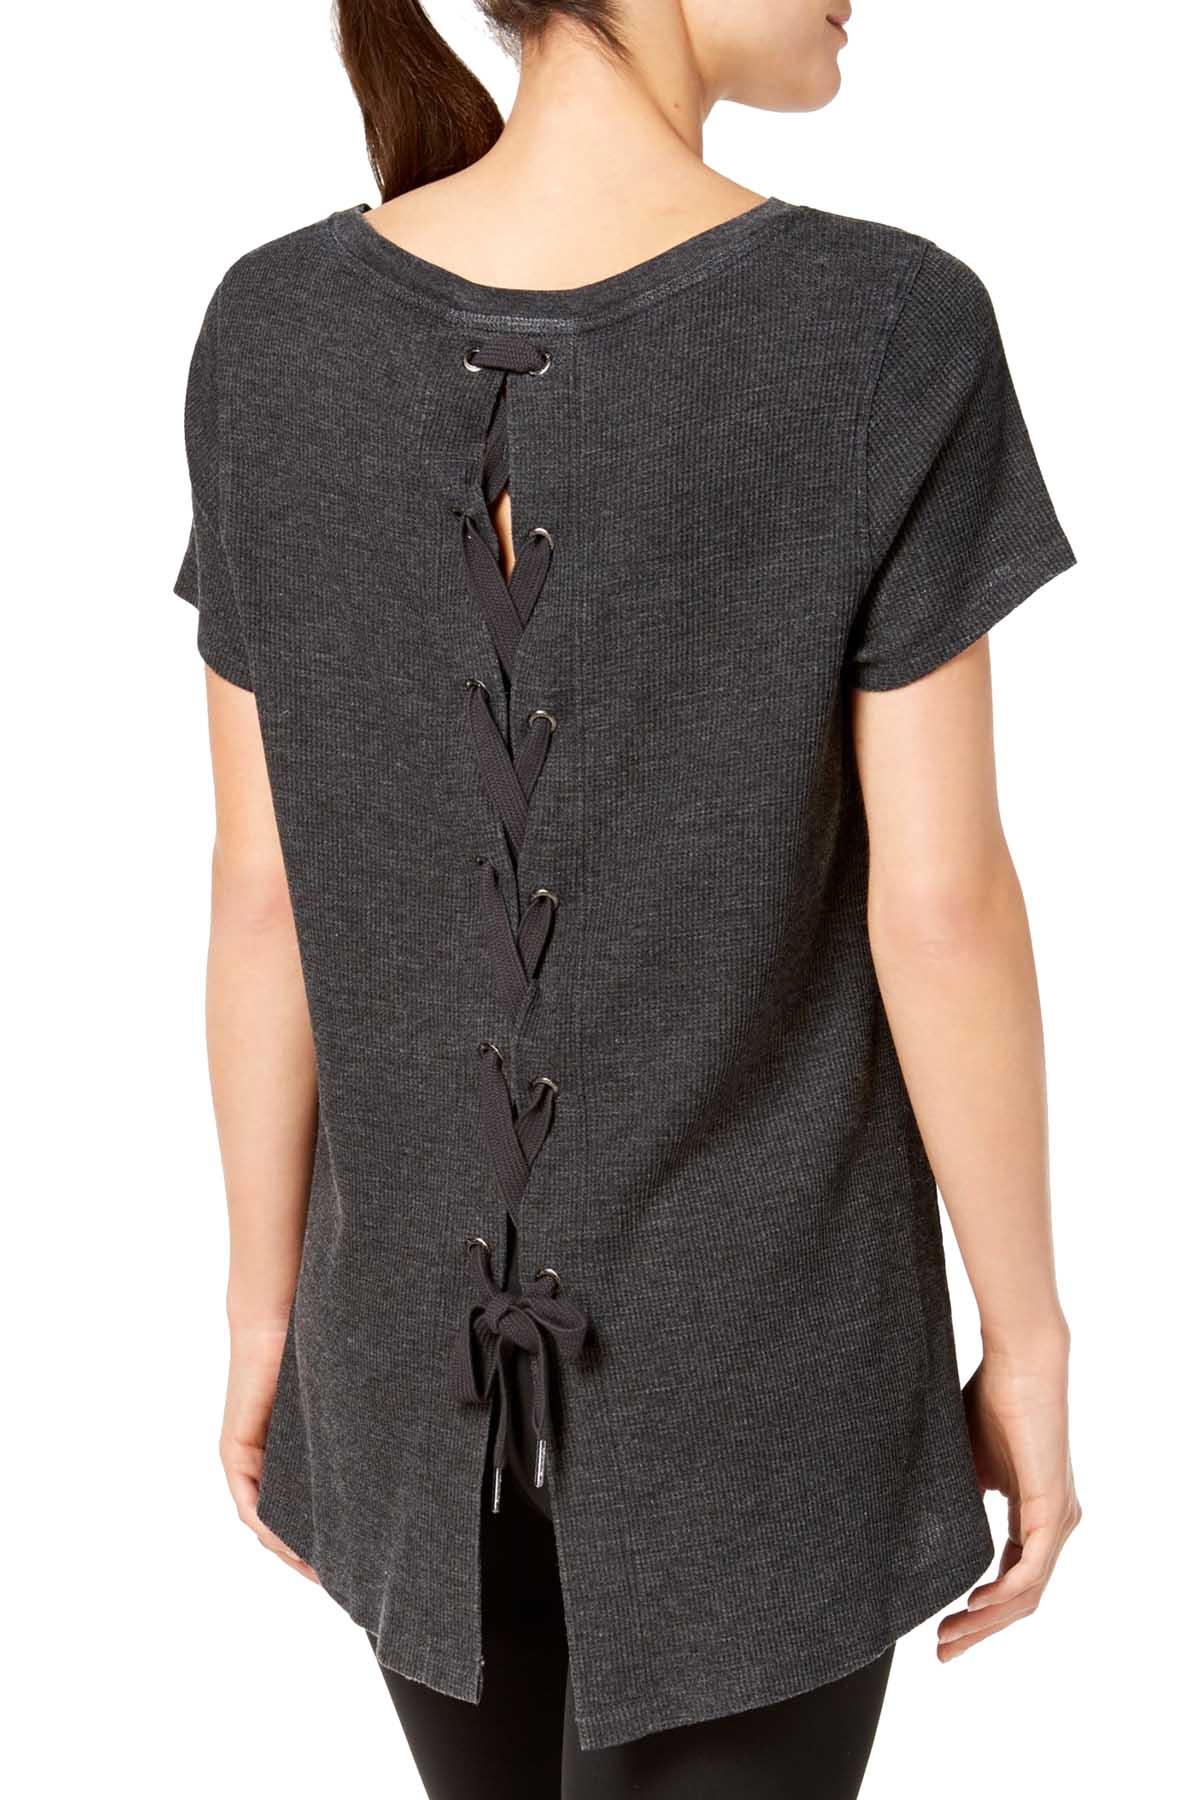 Calvin Klein Performance Slate Heather Lace-Up Back Top